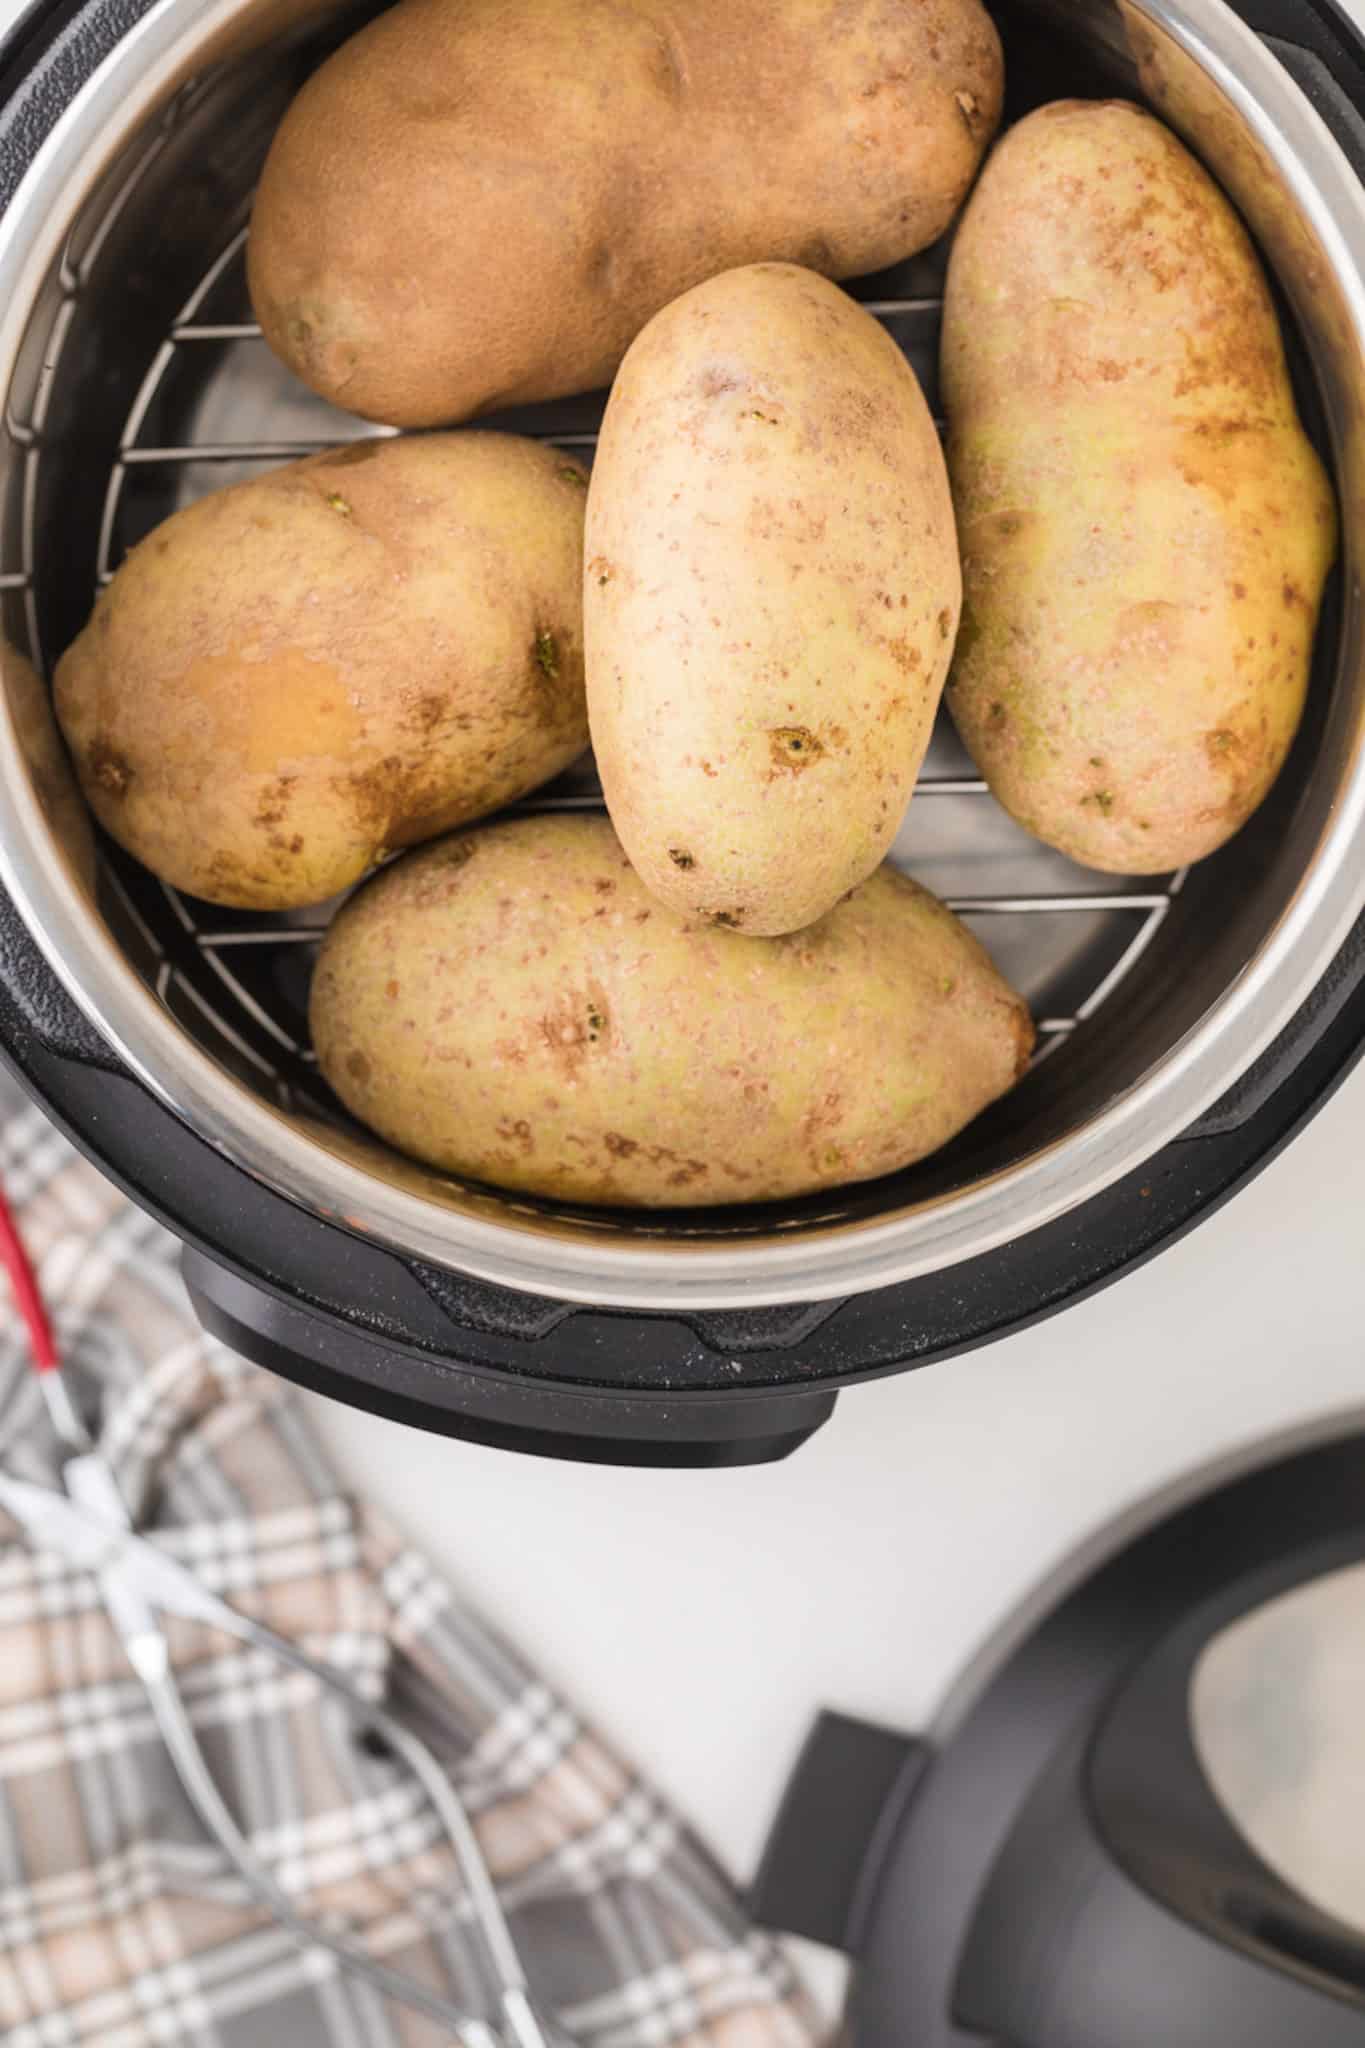 https://www.cleaneatingkitchen.com/wp-content/uploads/2021/11/baked-potatoes-in-instant-pot-scaled.jpg